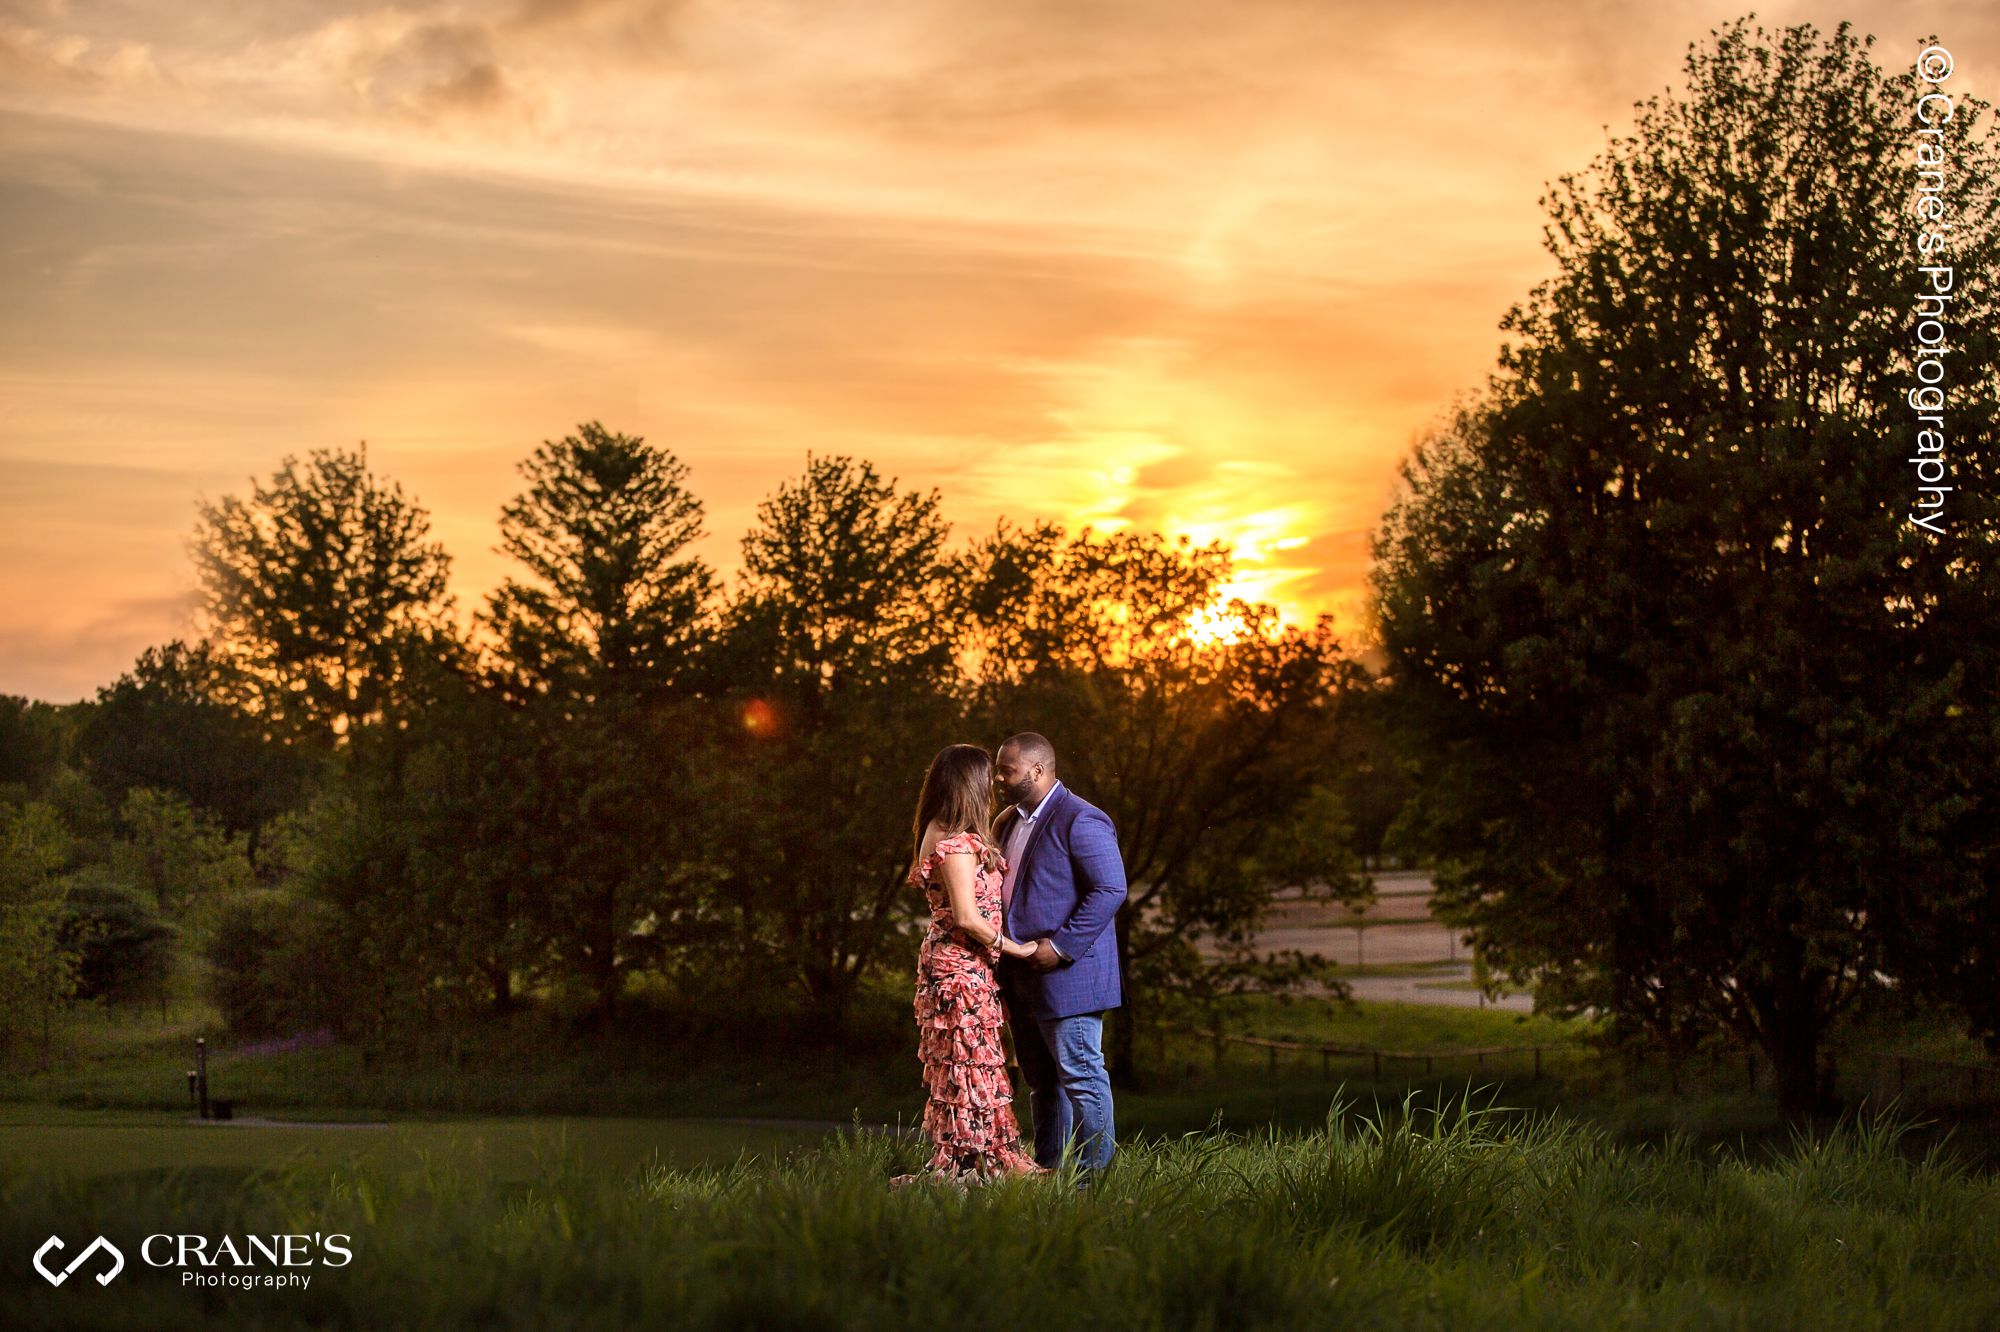 A romantic engagement session photo of a couple at Cantigny Park during sunset time.